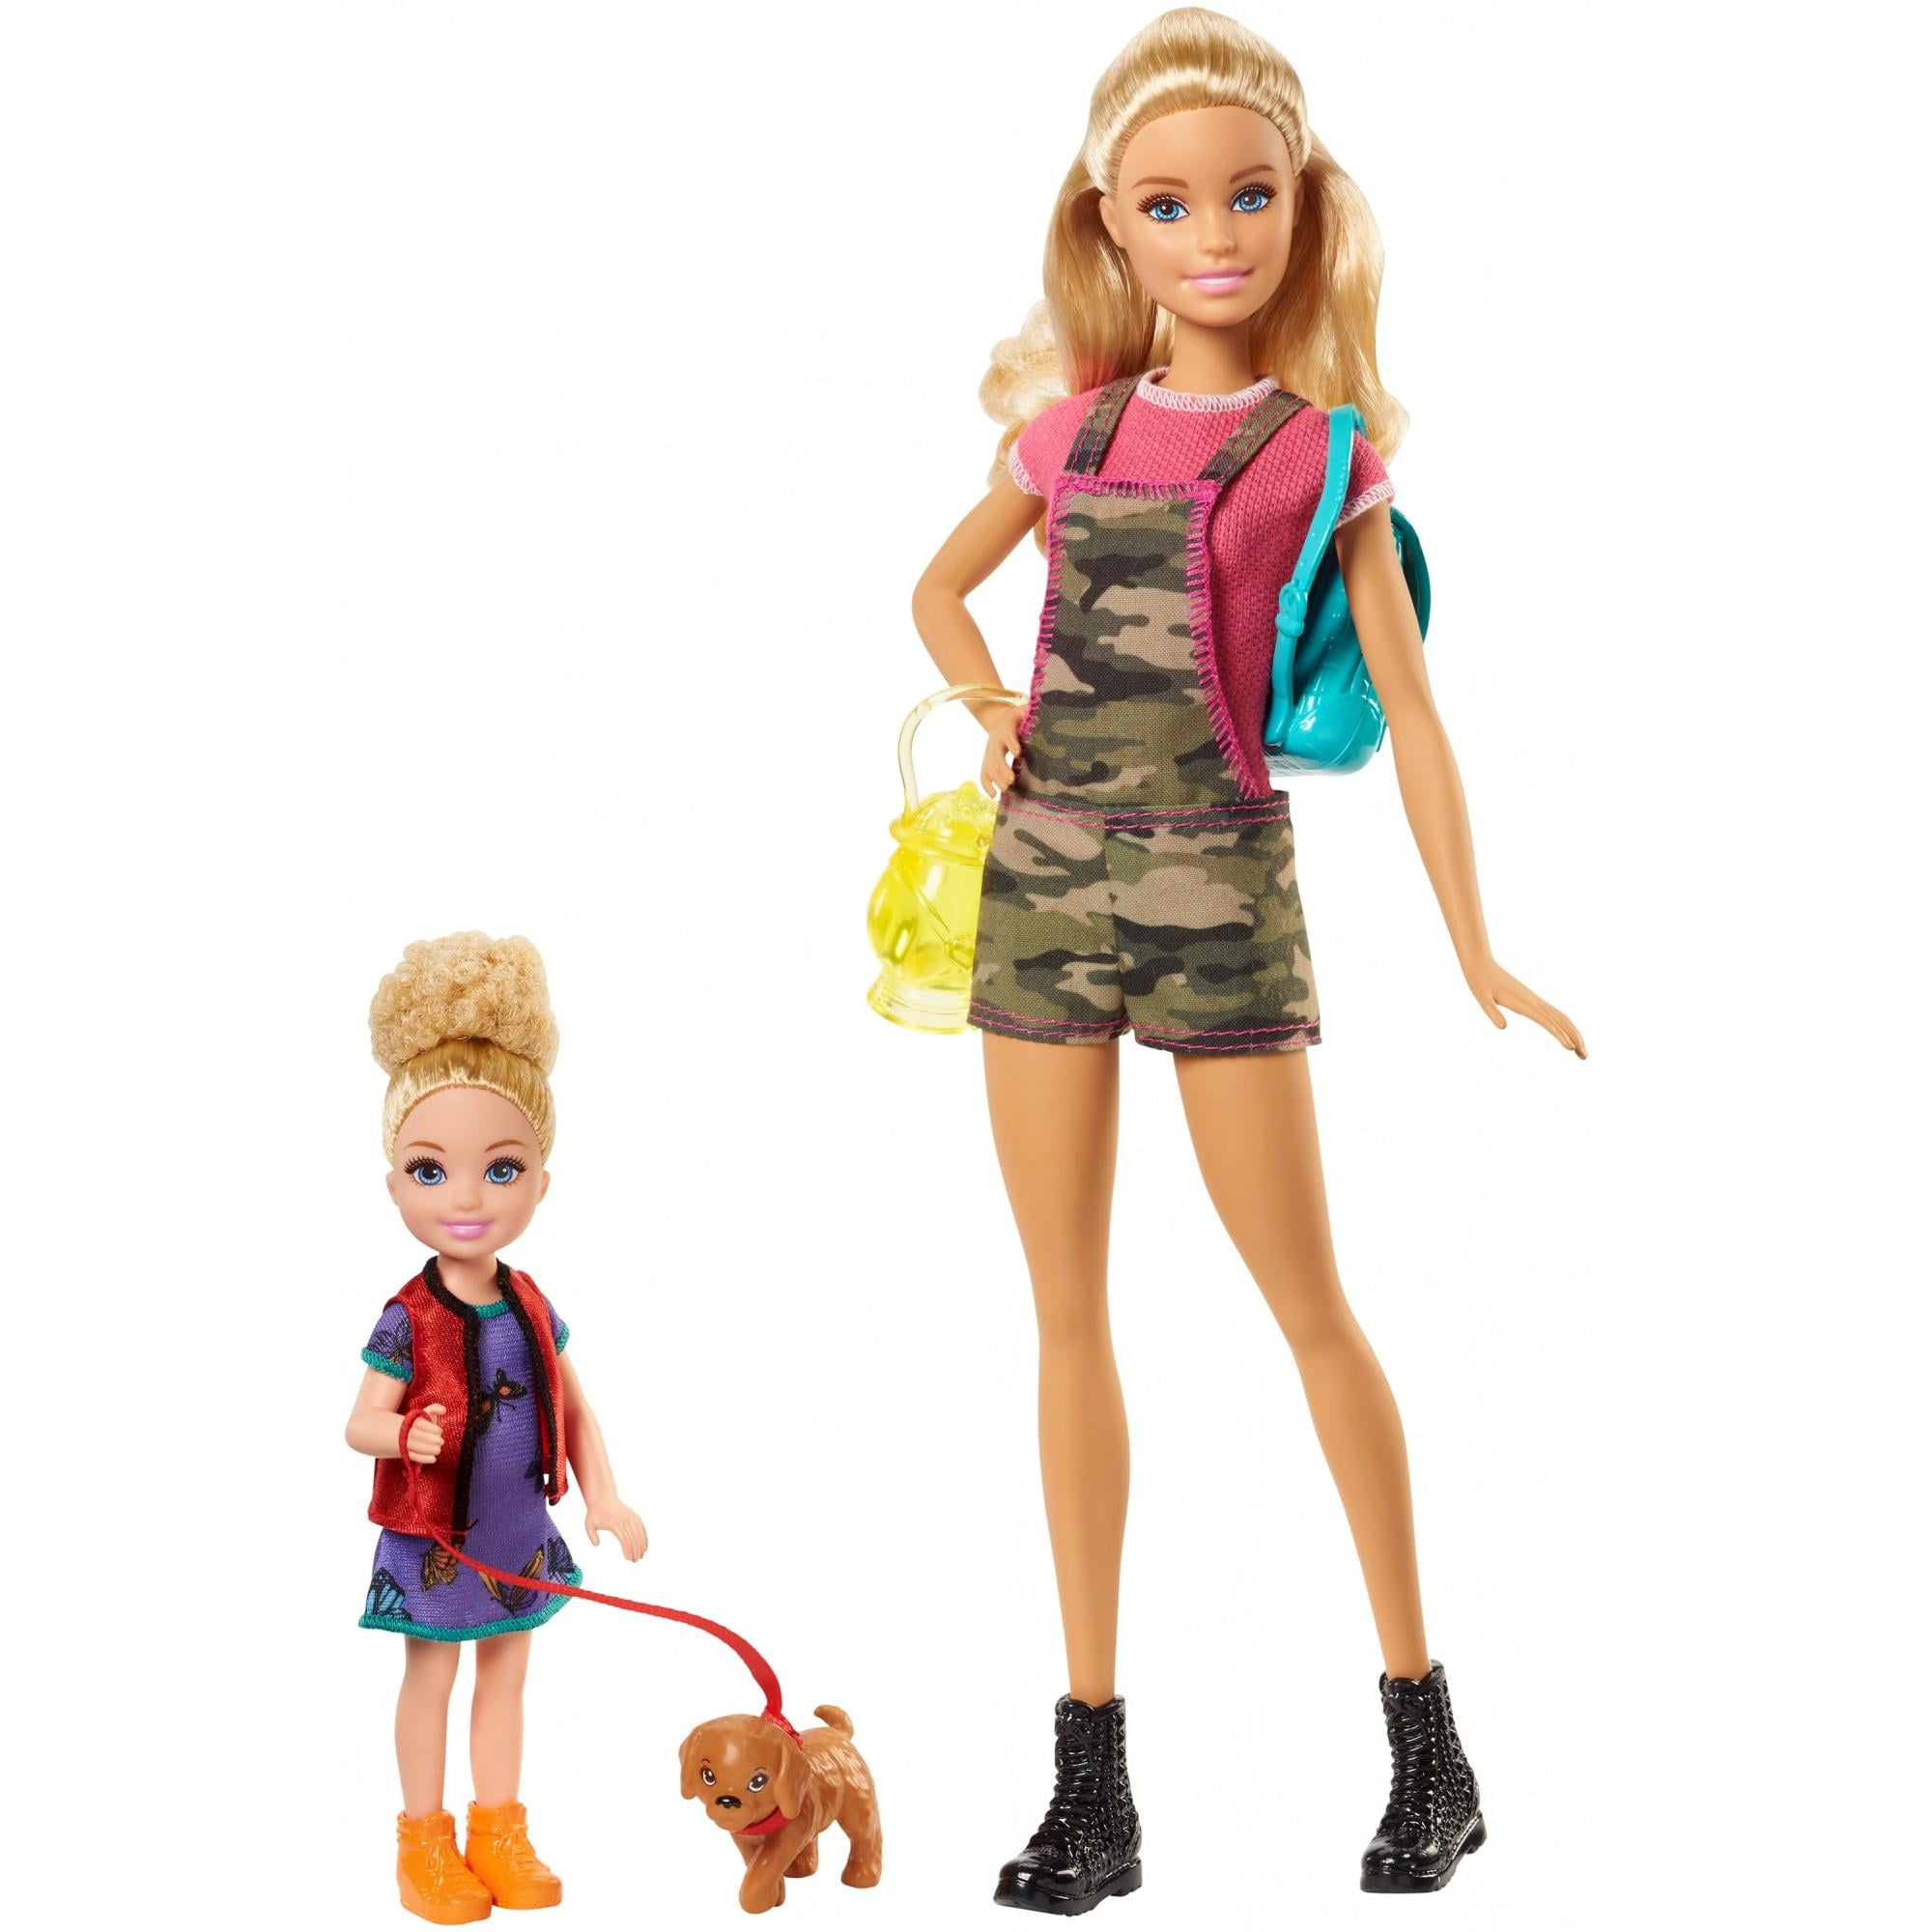 Barbie Doll & Chelsea Sister Accessories -